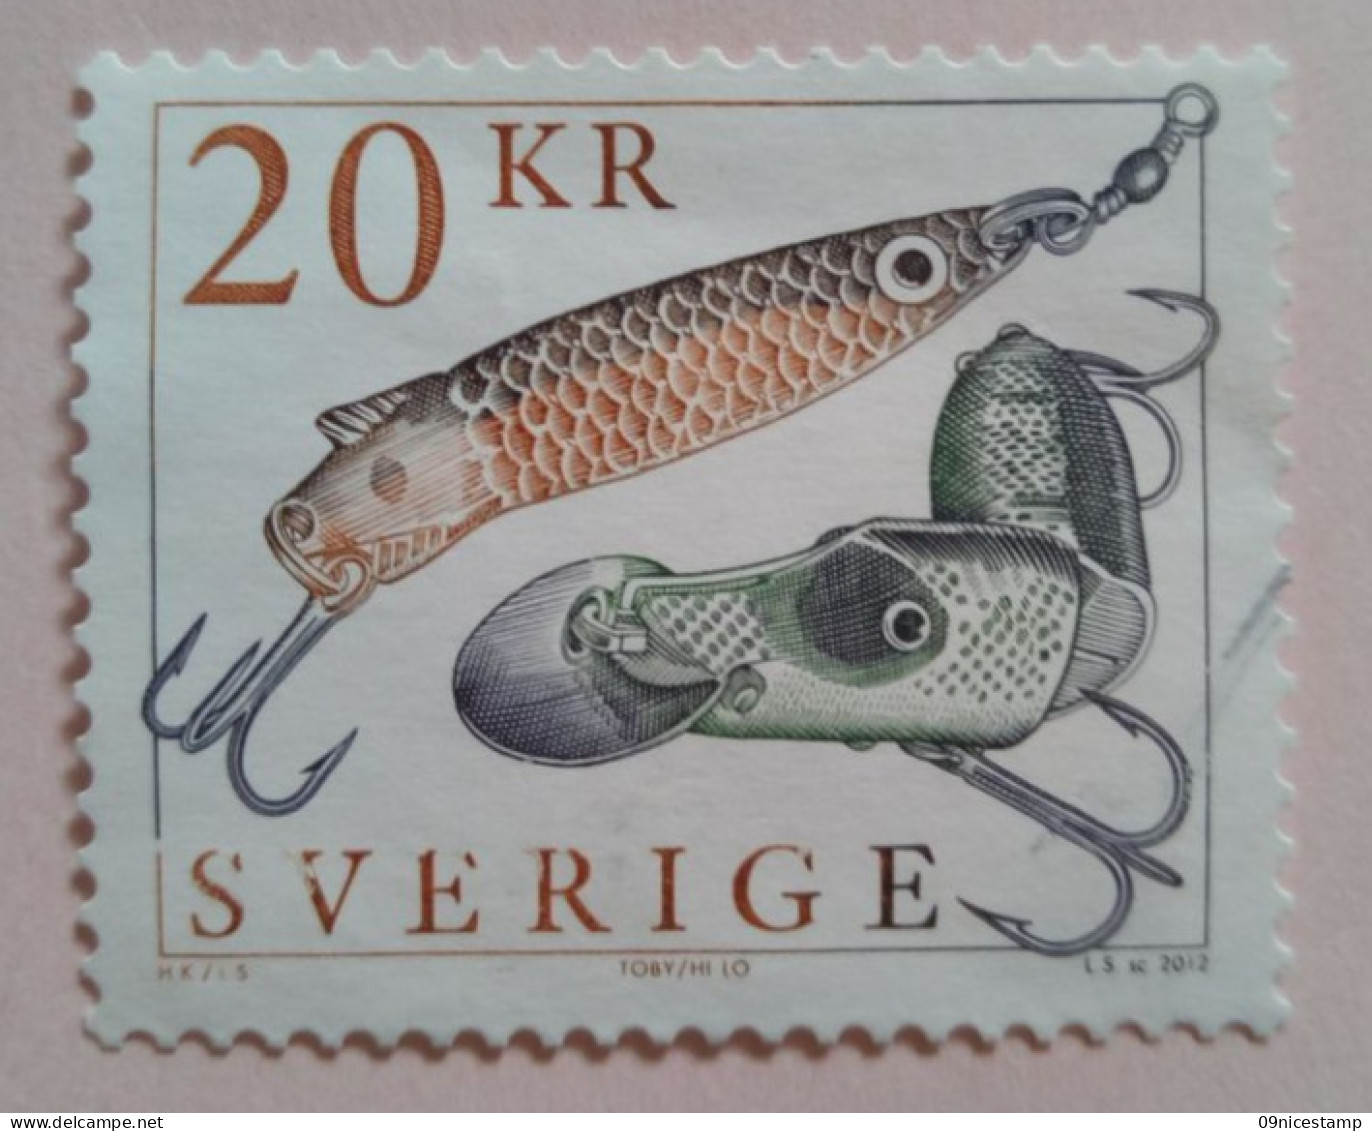 20 Kr Stamp From Sweden, Cancelled, Year 2012, Michel-Nr. 2874 - Used Stamps